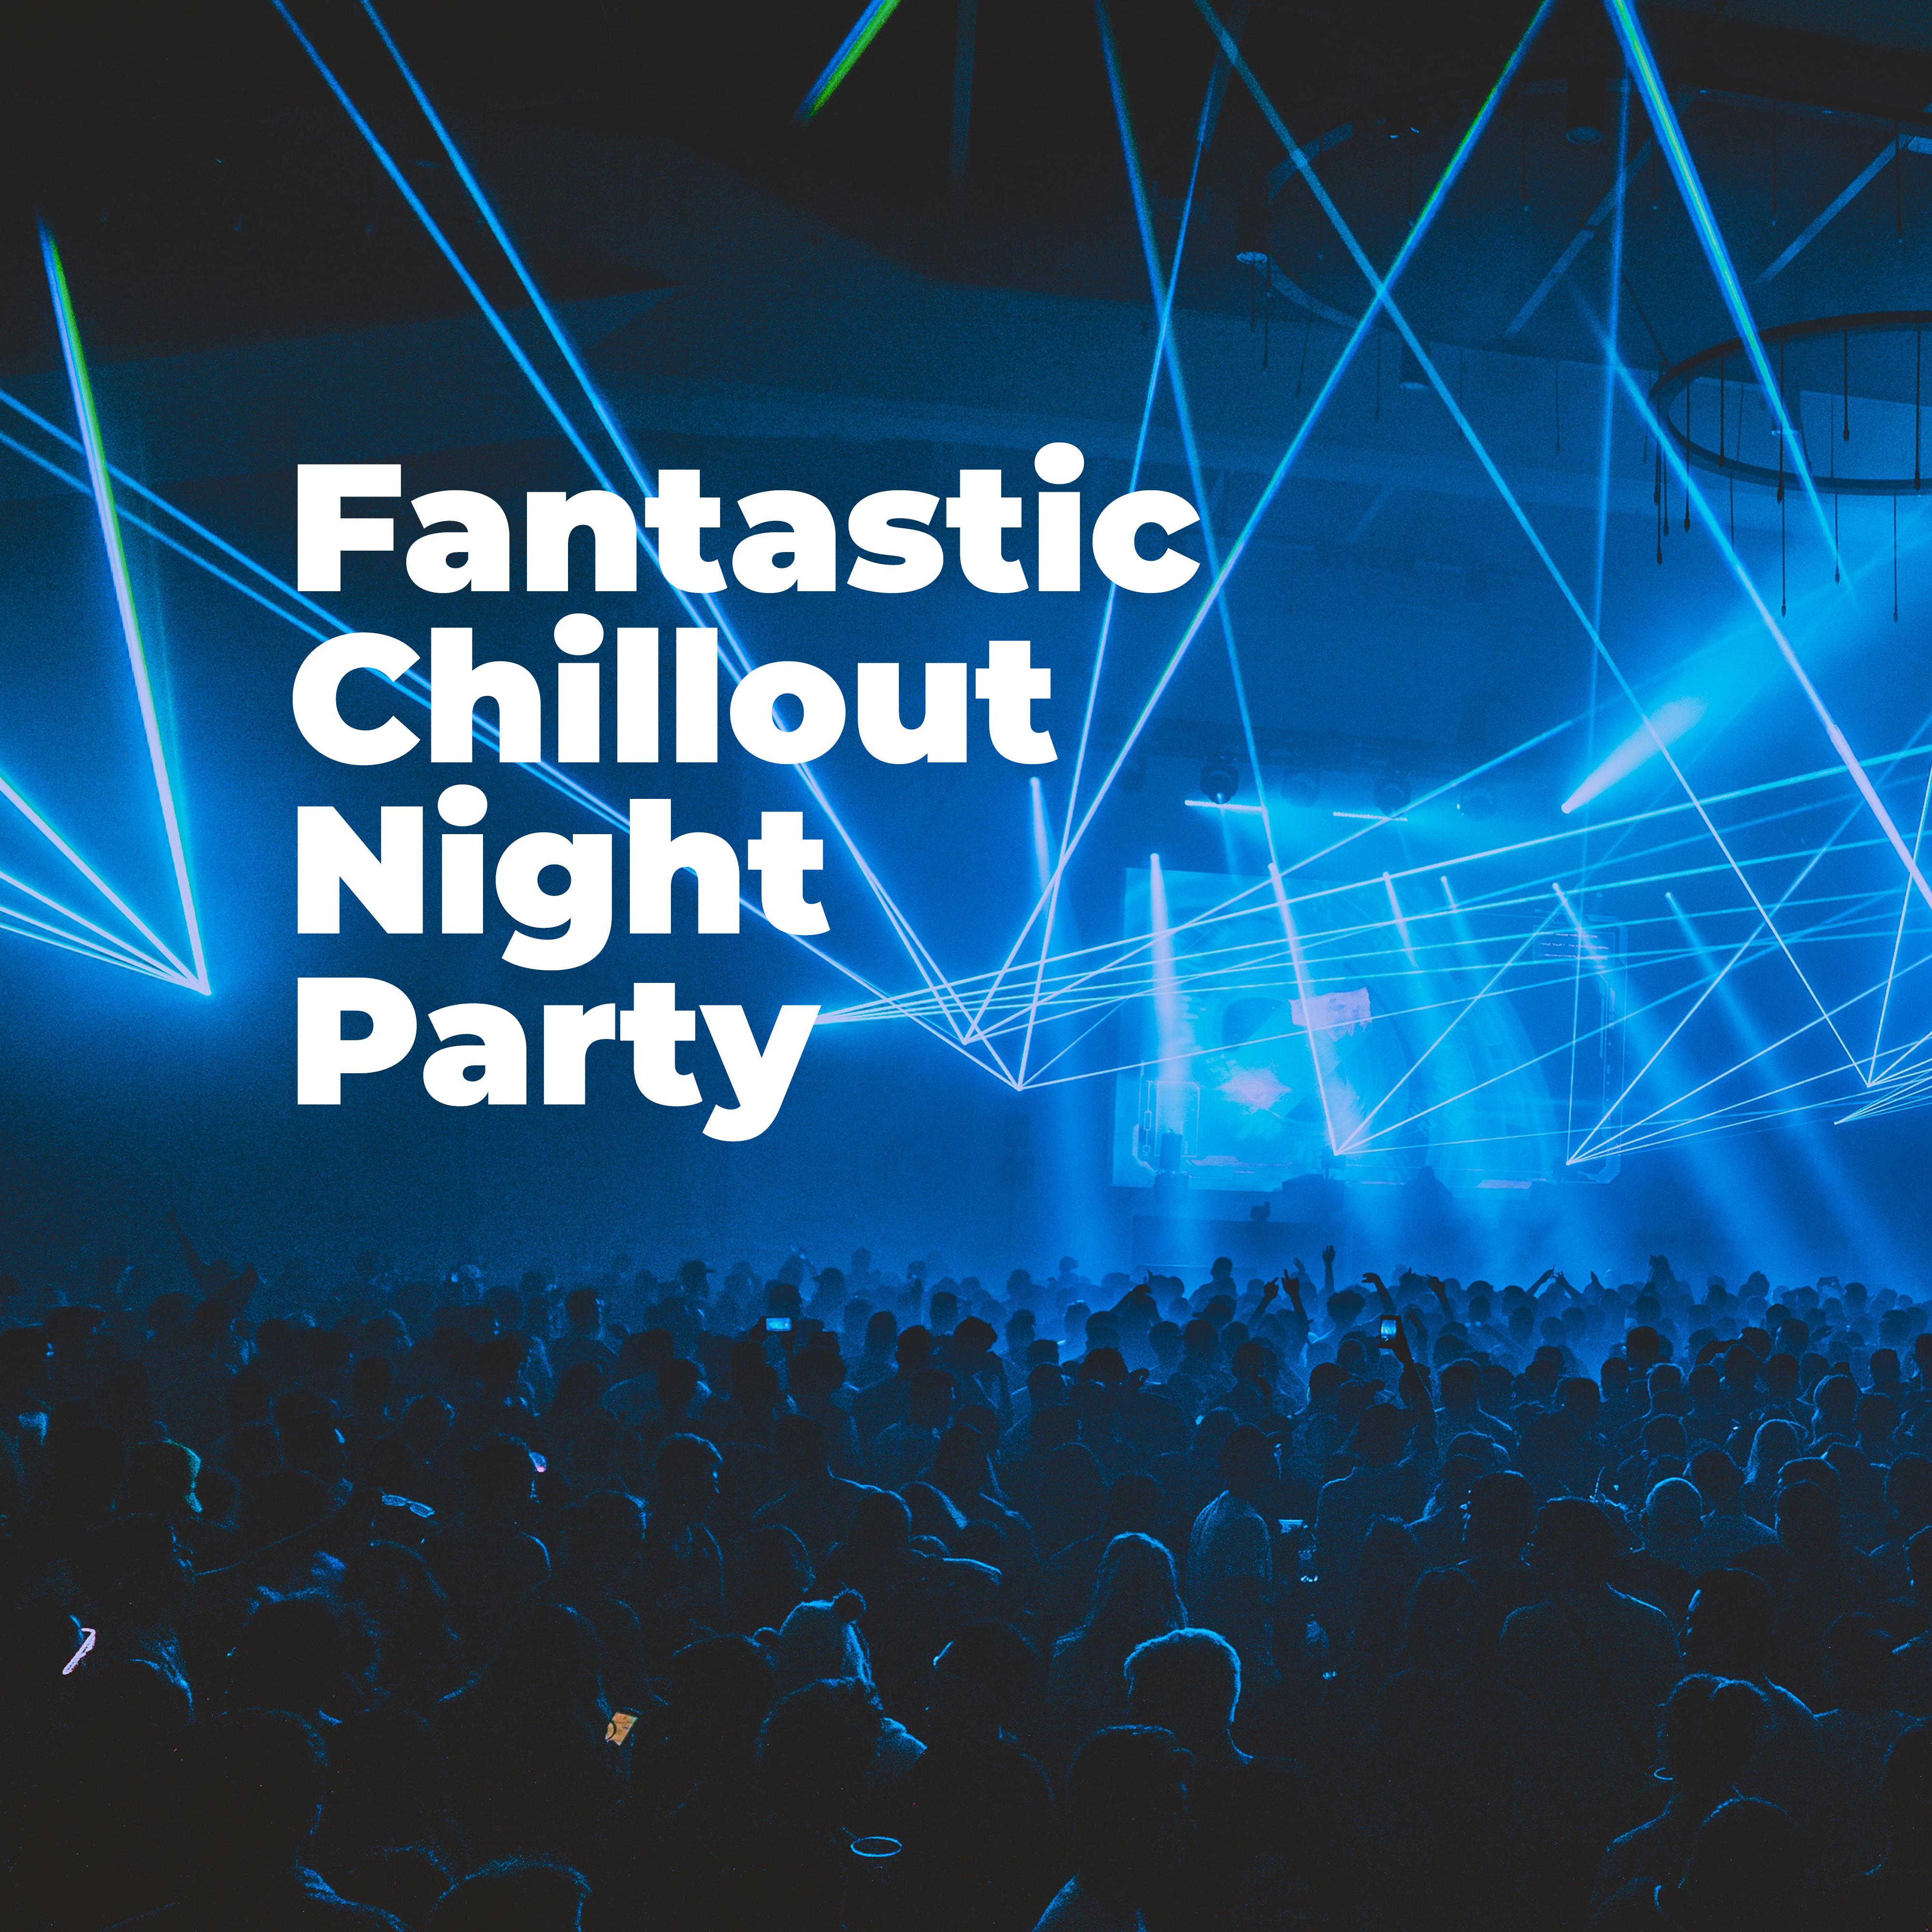 Fantastic Chillout Night Party